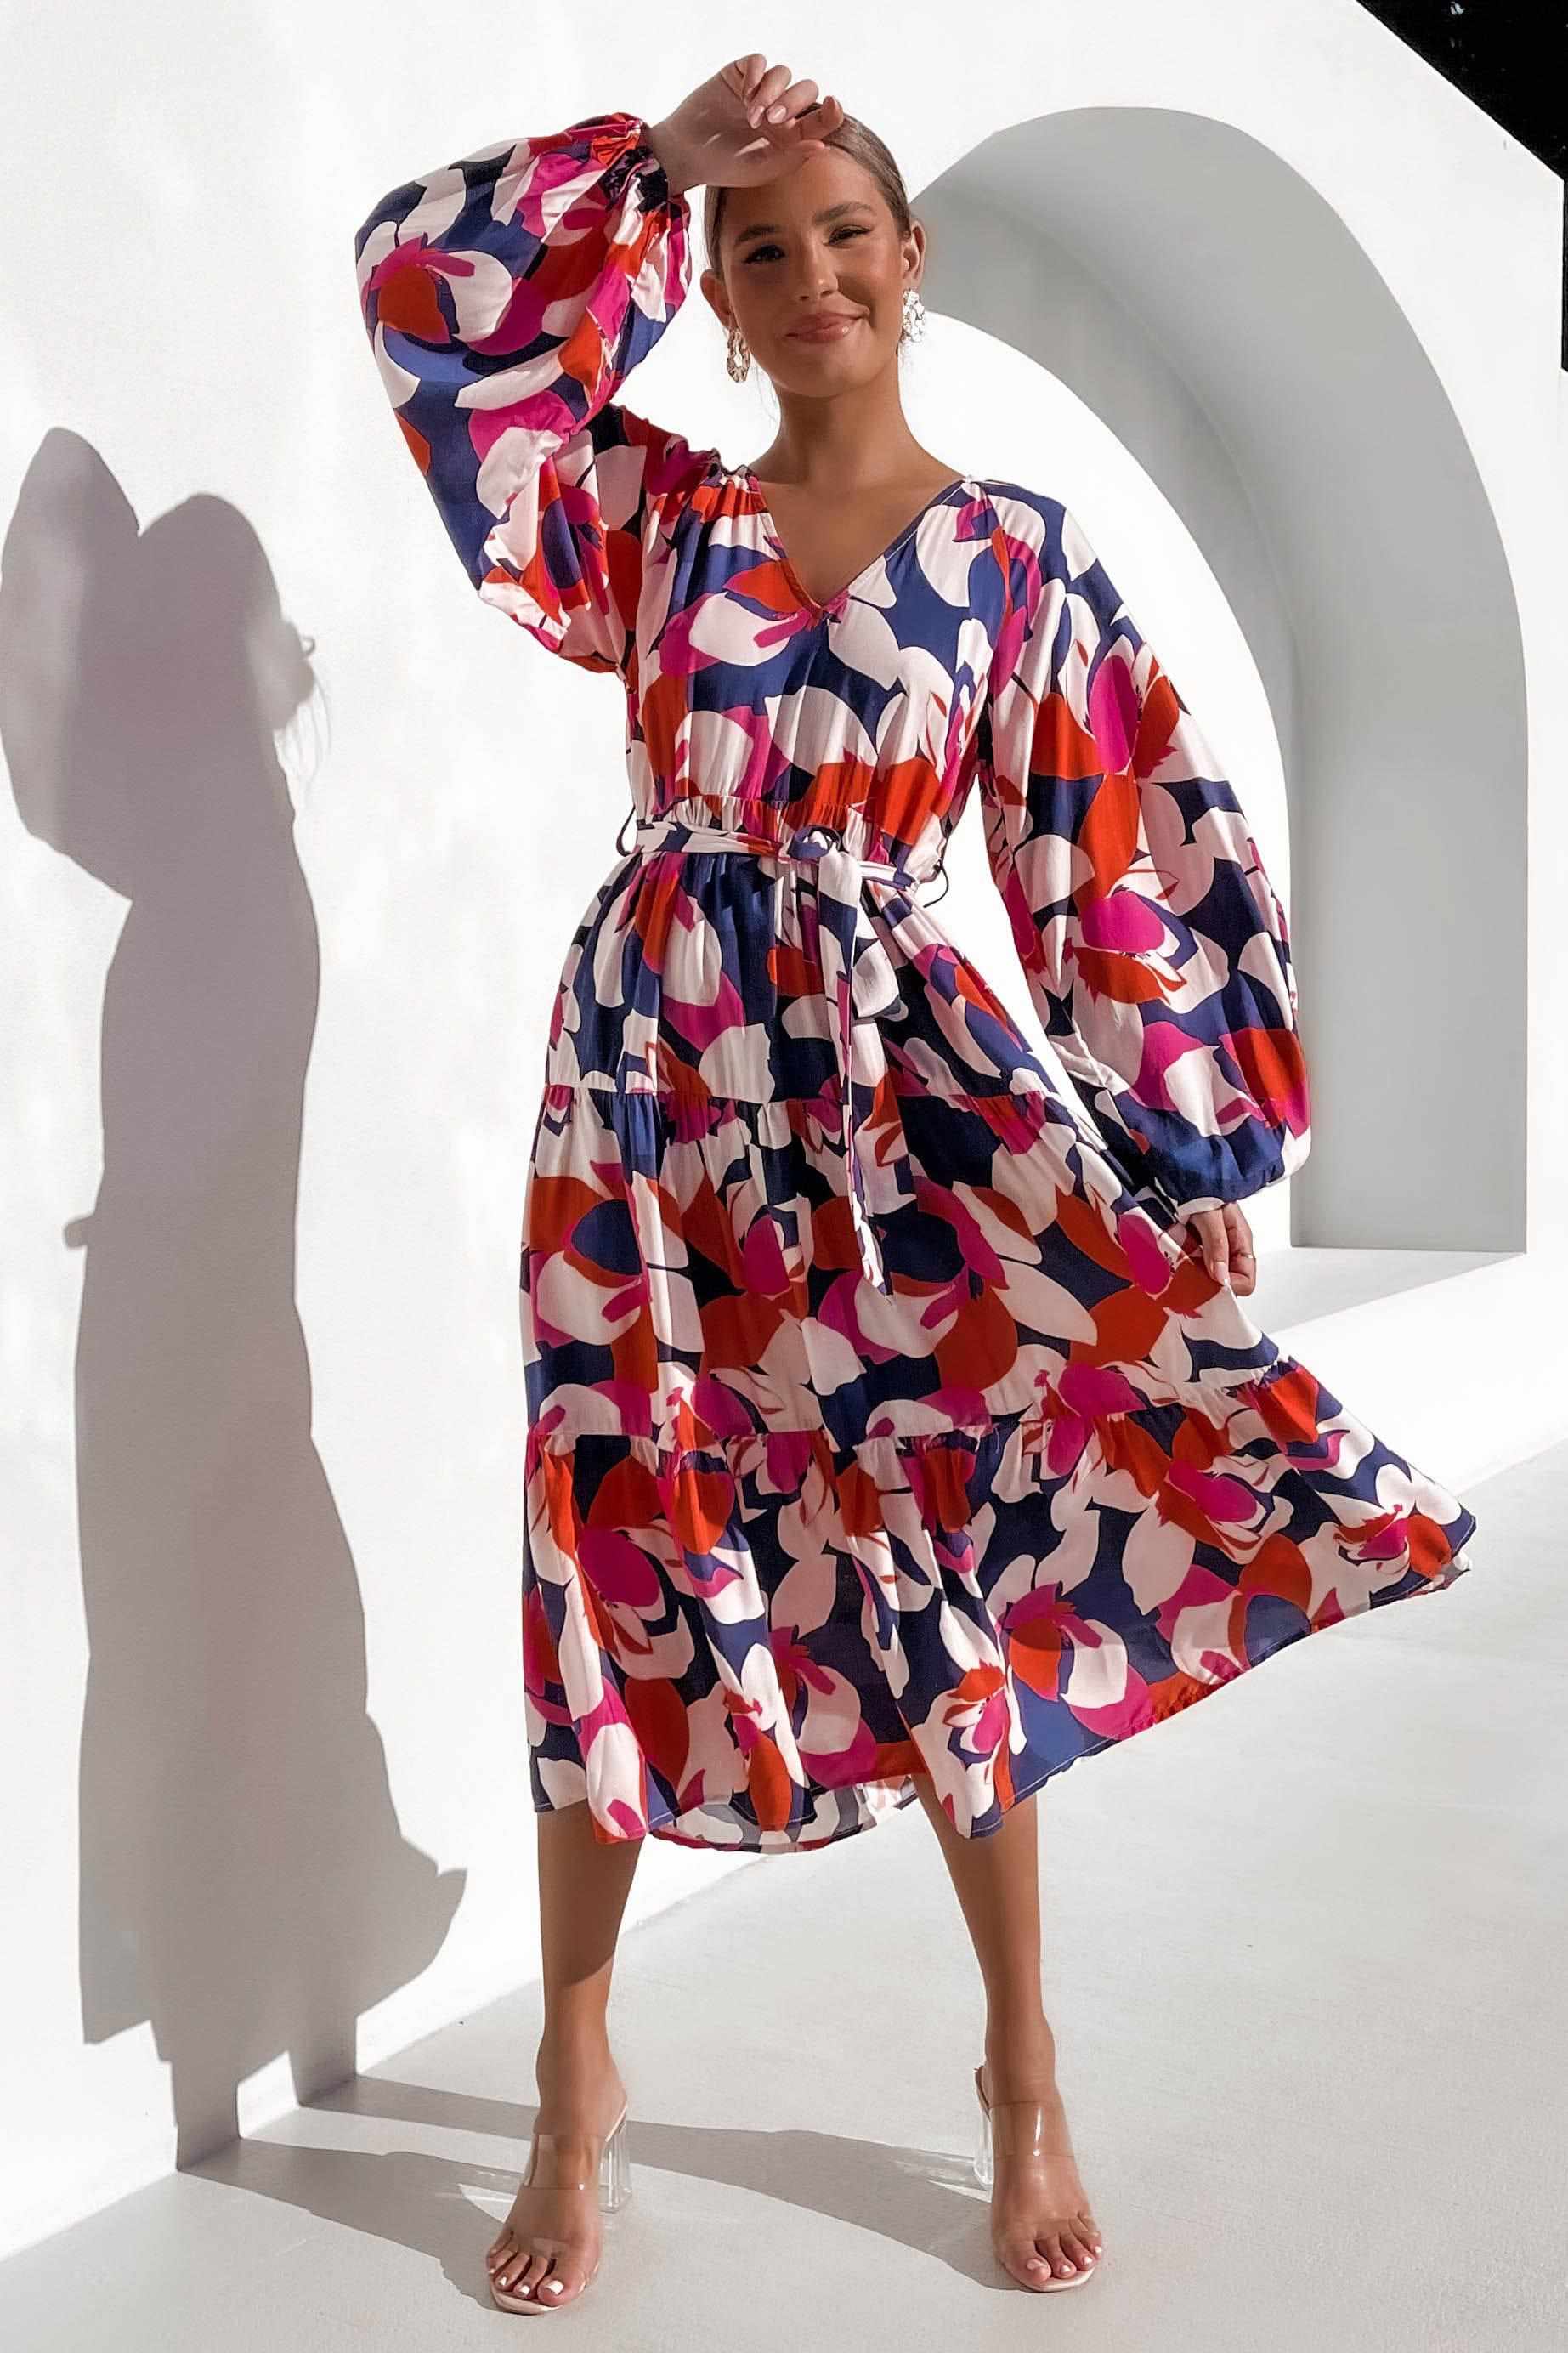 Anny Dress, BALLOON SLEEVE, BLUE, DRESS, DRESSES, LONG SLEEVE, MIDI DRESS, PATTERN, PRINT, RAYON, RED, WAIST TIE, Anny Dress only $71.00 @ MISHKAH ONLINE FASHION BOUTIQUE, Shop The Latest Women's Dresses - Our New Anny Dress is only $71.00, @ MISHKAH ONLINE FASHION BOUTIQUE-MISHKAH